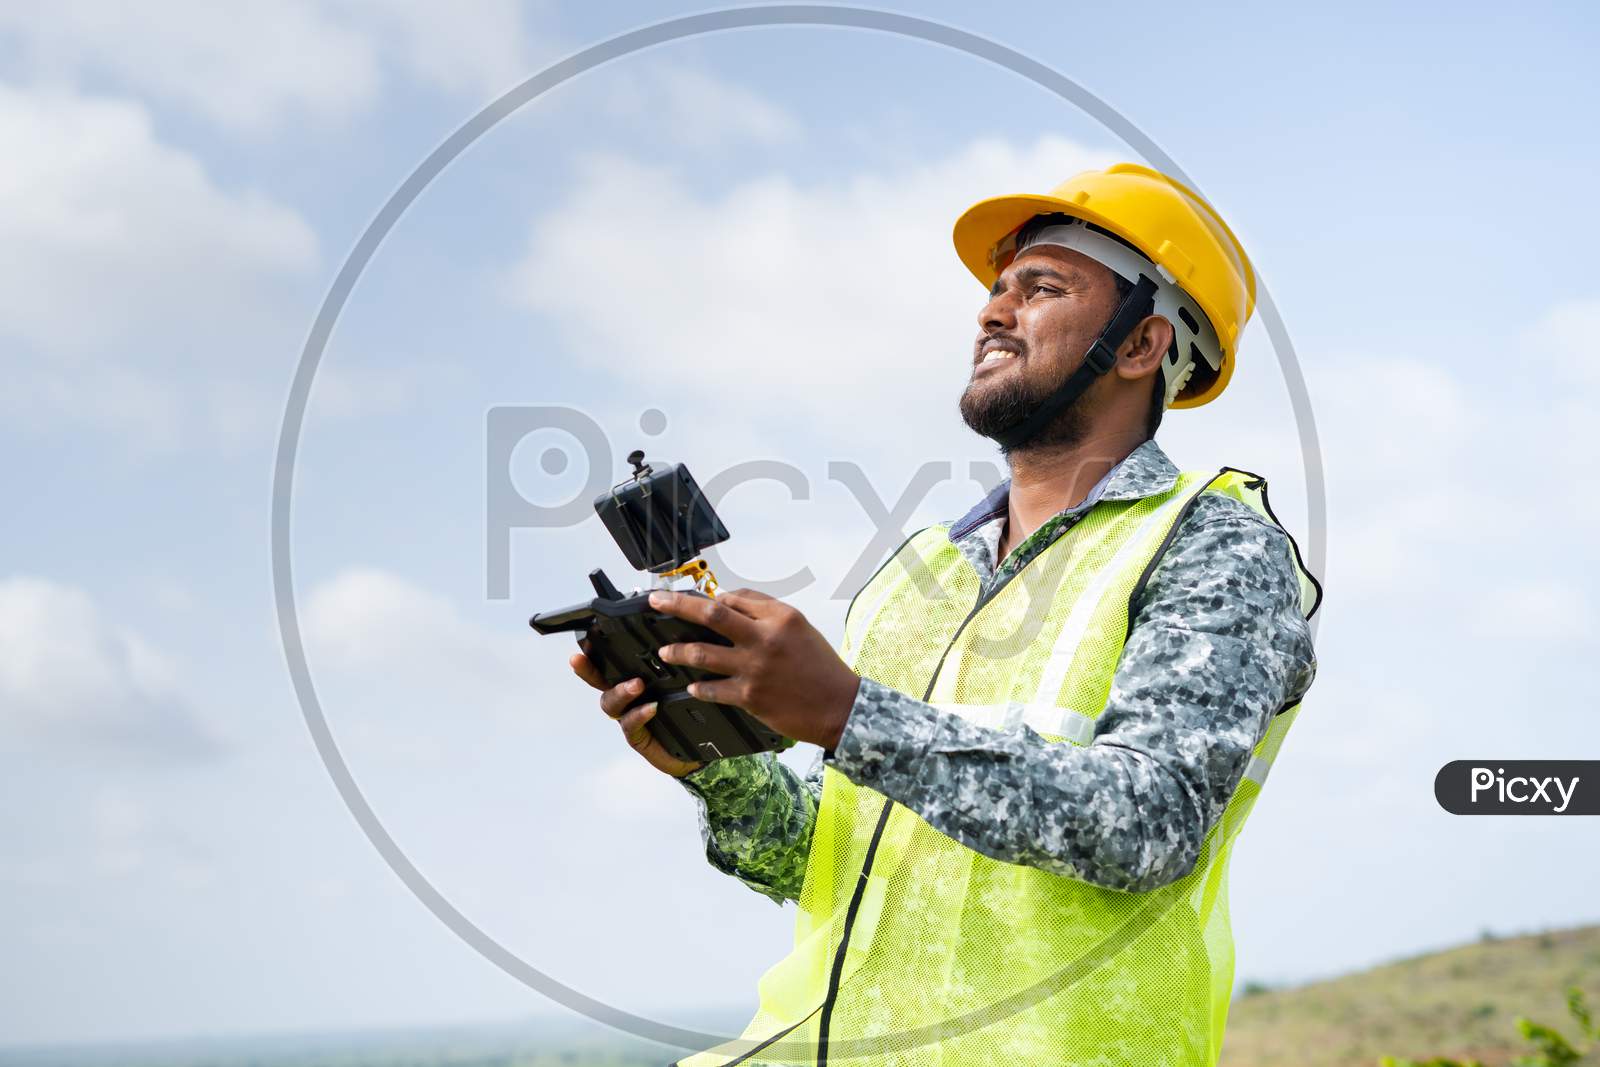 Drone Pilot With Safety Helmet Operating Drone Using Remote Controller - Concept Of Engineer Using Drone Technology To Survey Land.